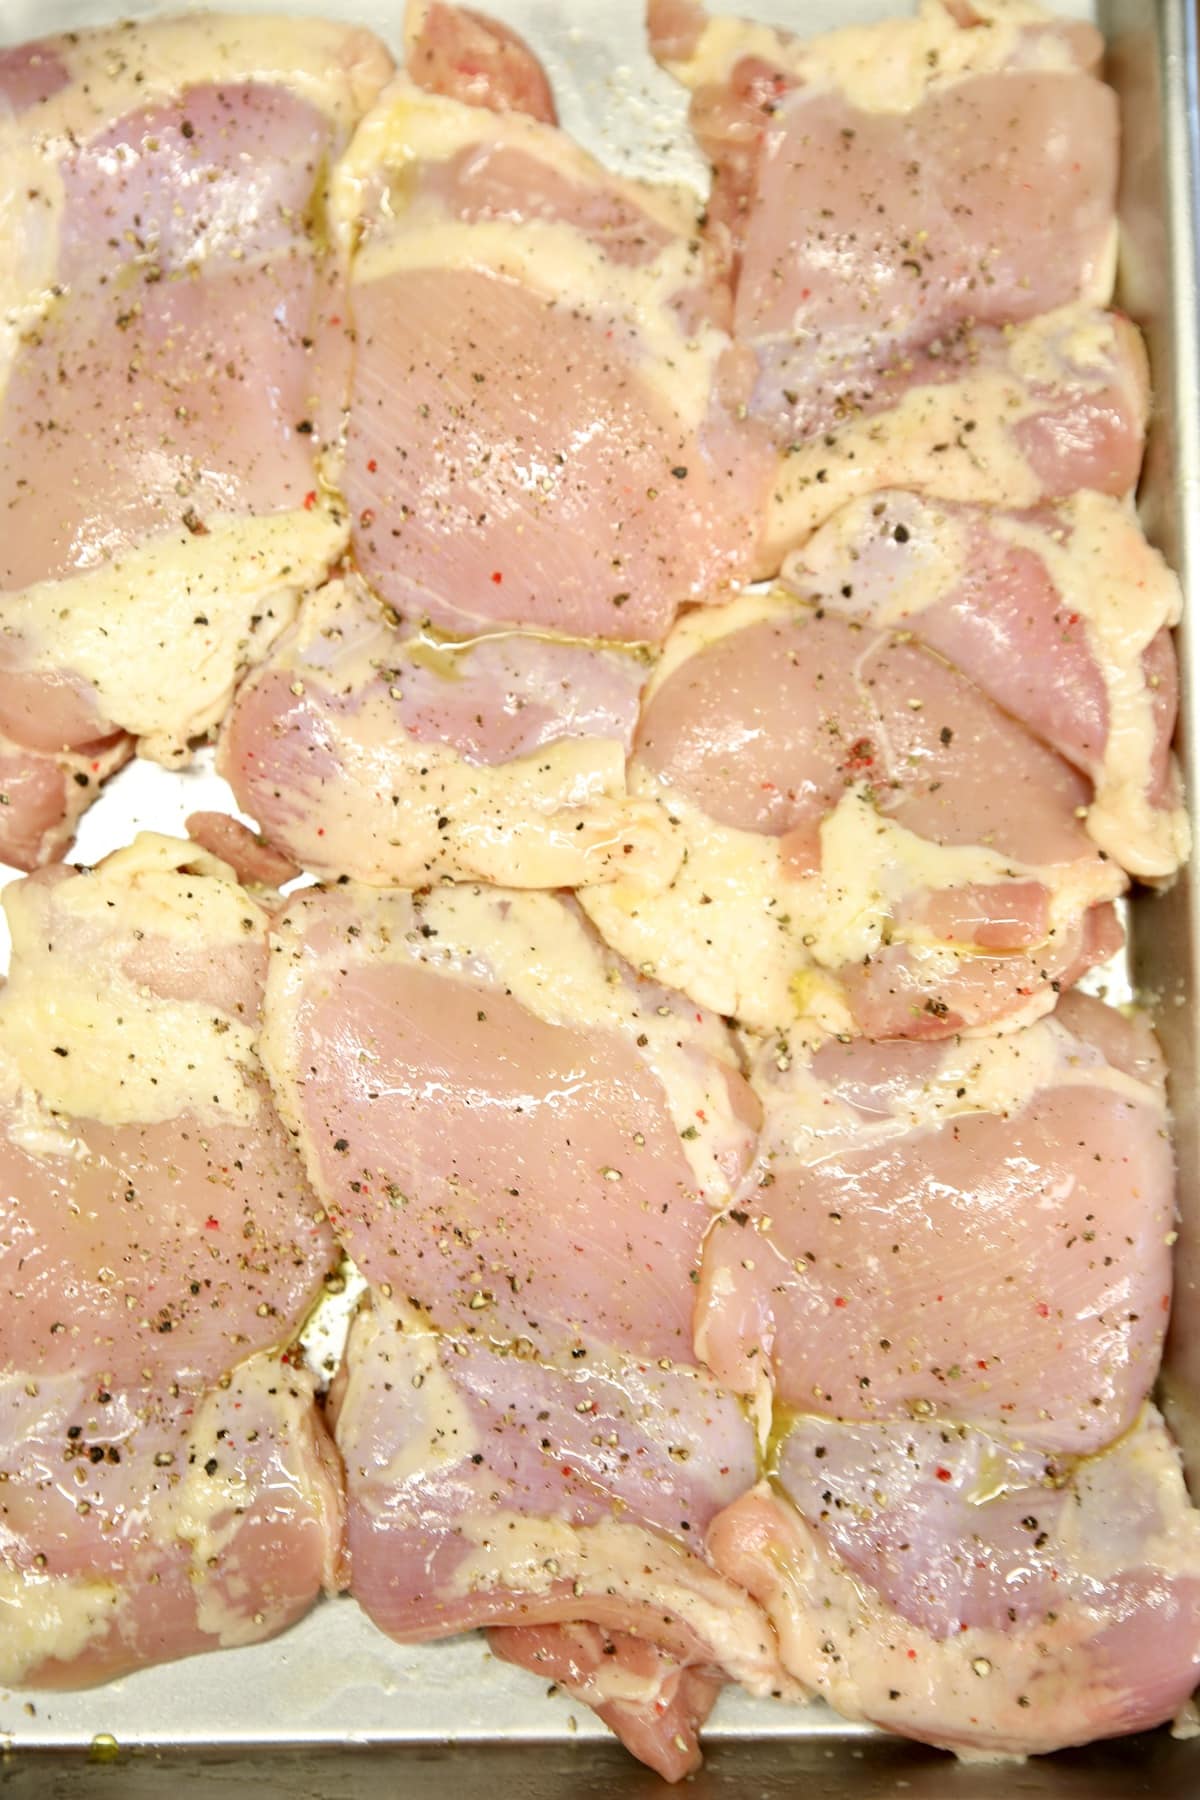 Boneless chicken thighs with olive oil, salt and pepper ready to grill.